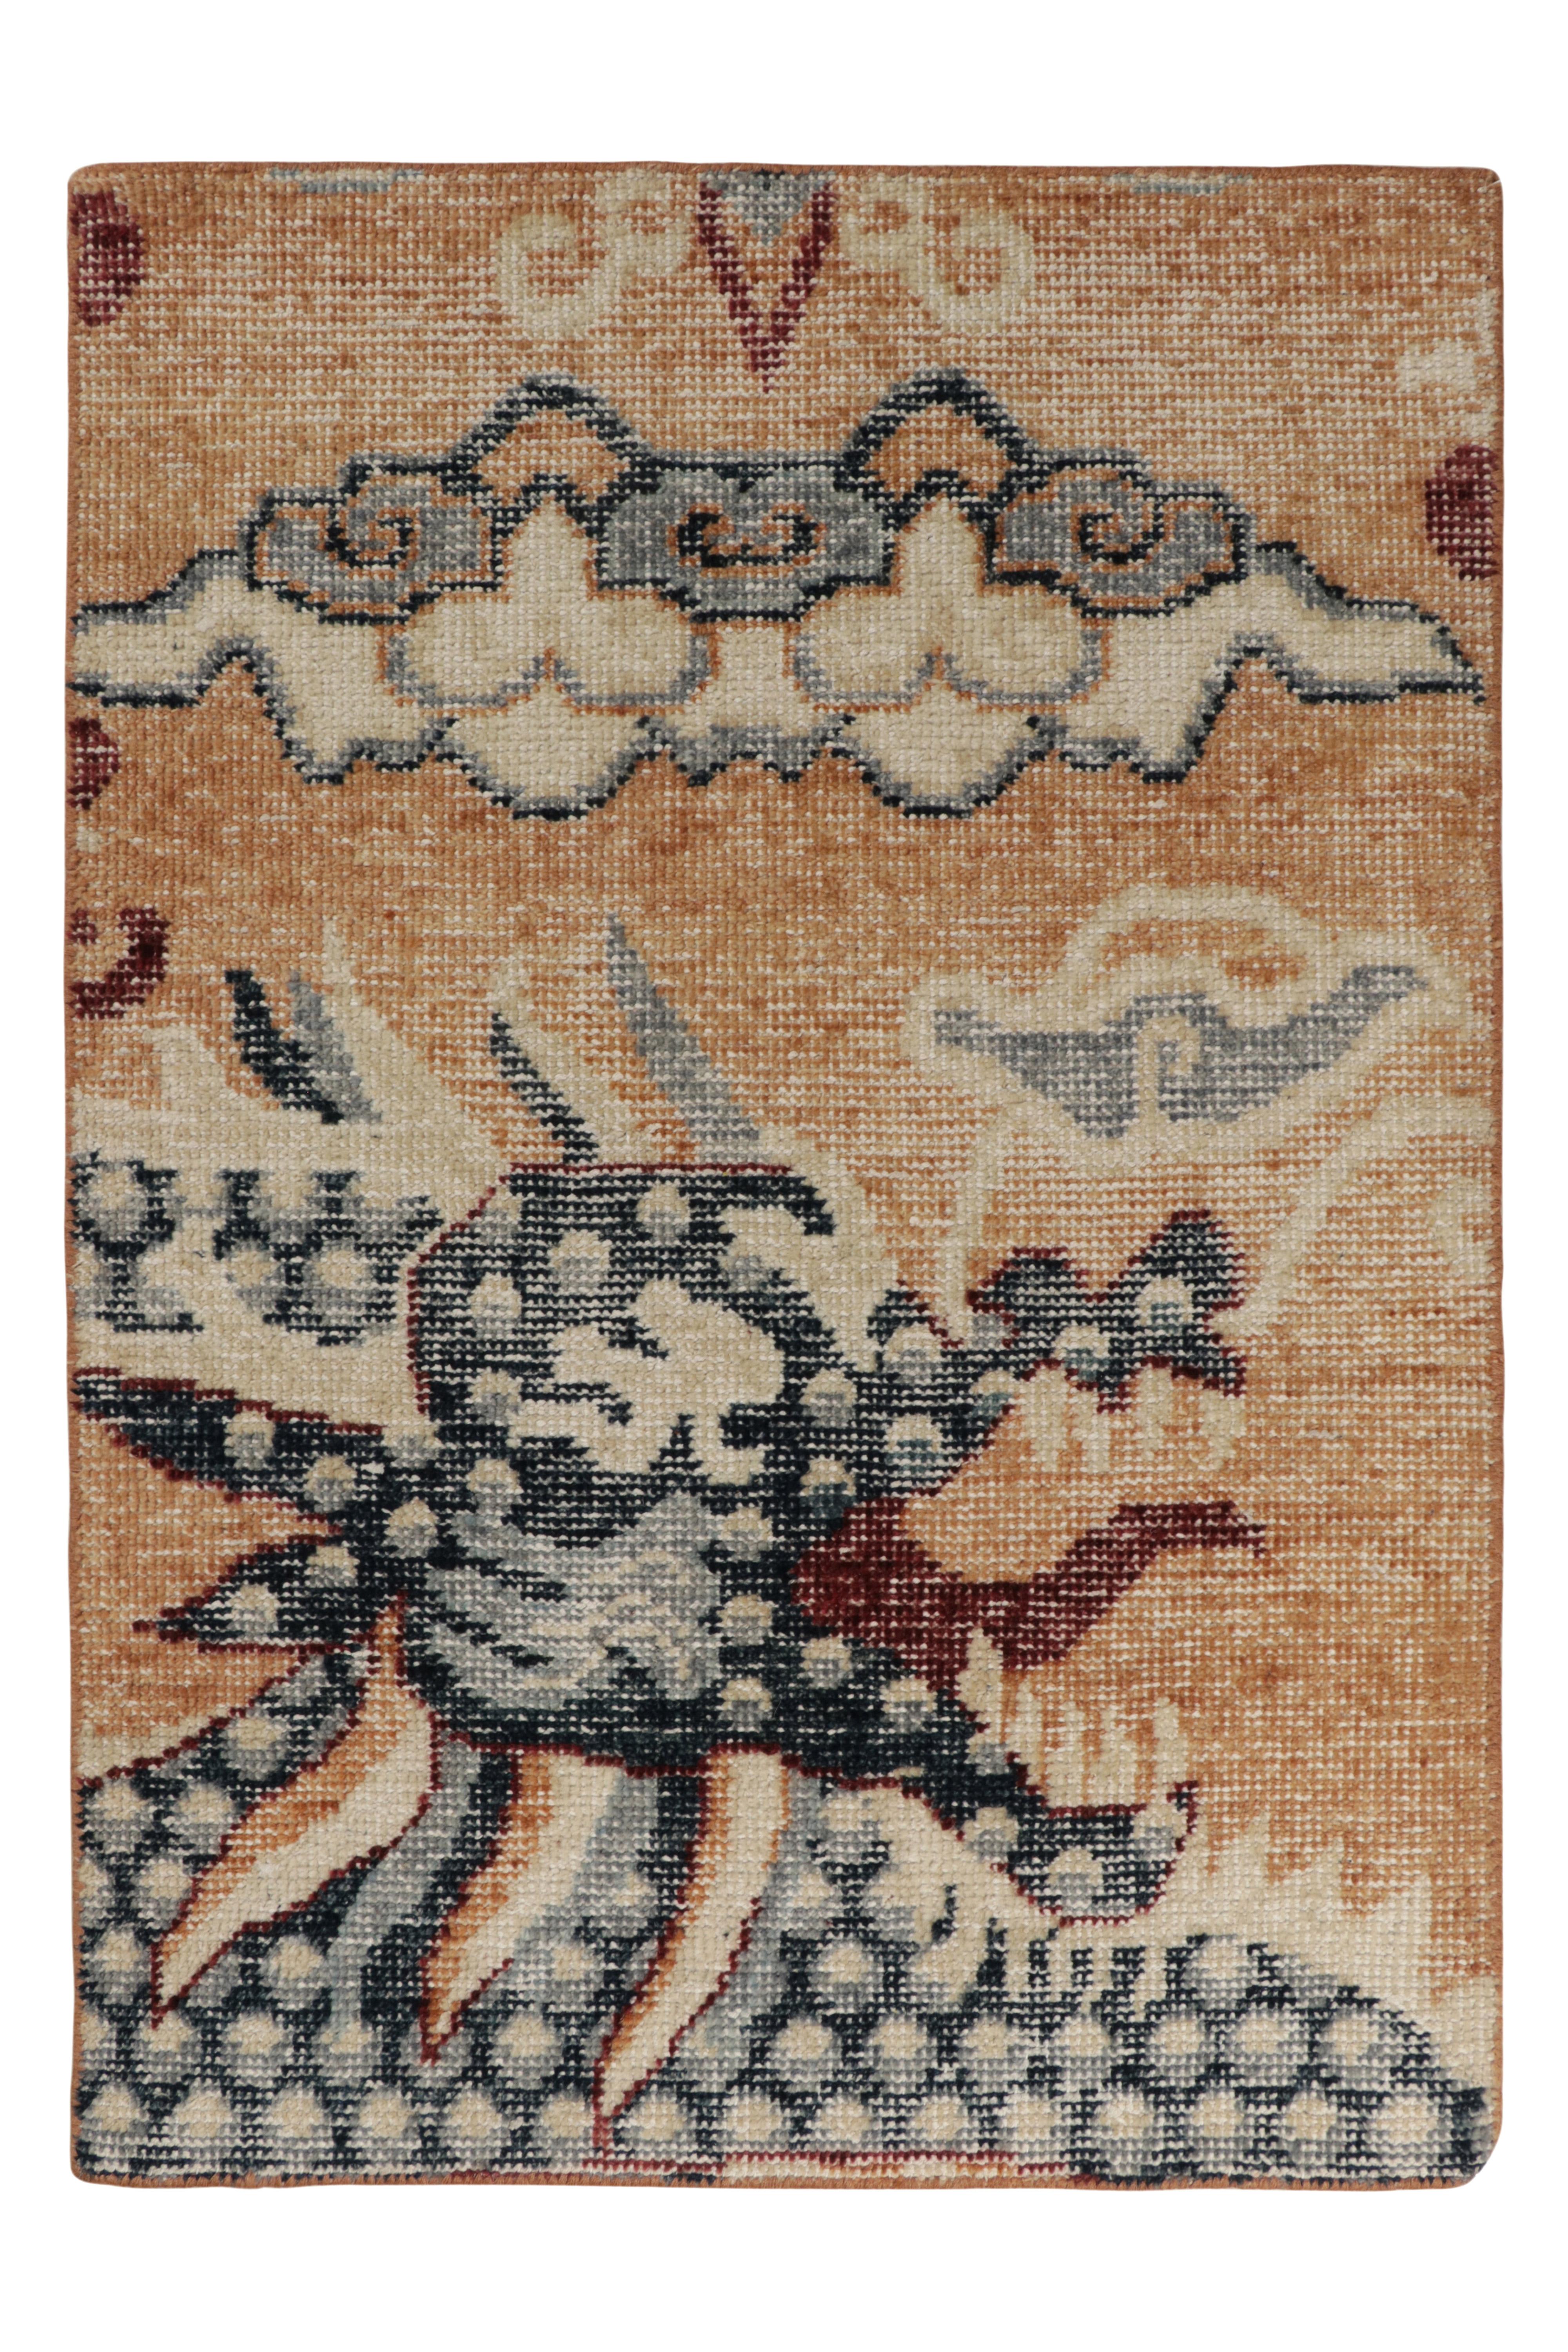 Hand-Knotted Rug & Kilim’s Distressed Style Gift-Size Rug in Blue Dragon Pictorials